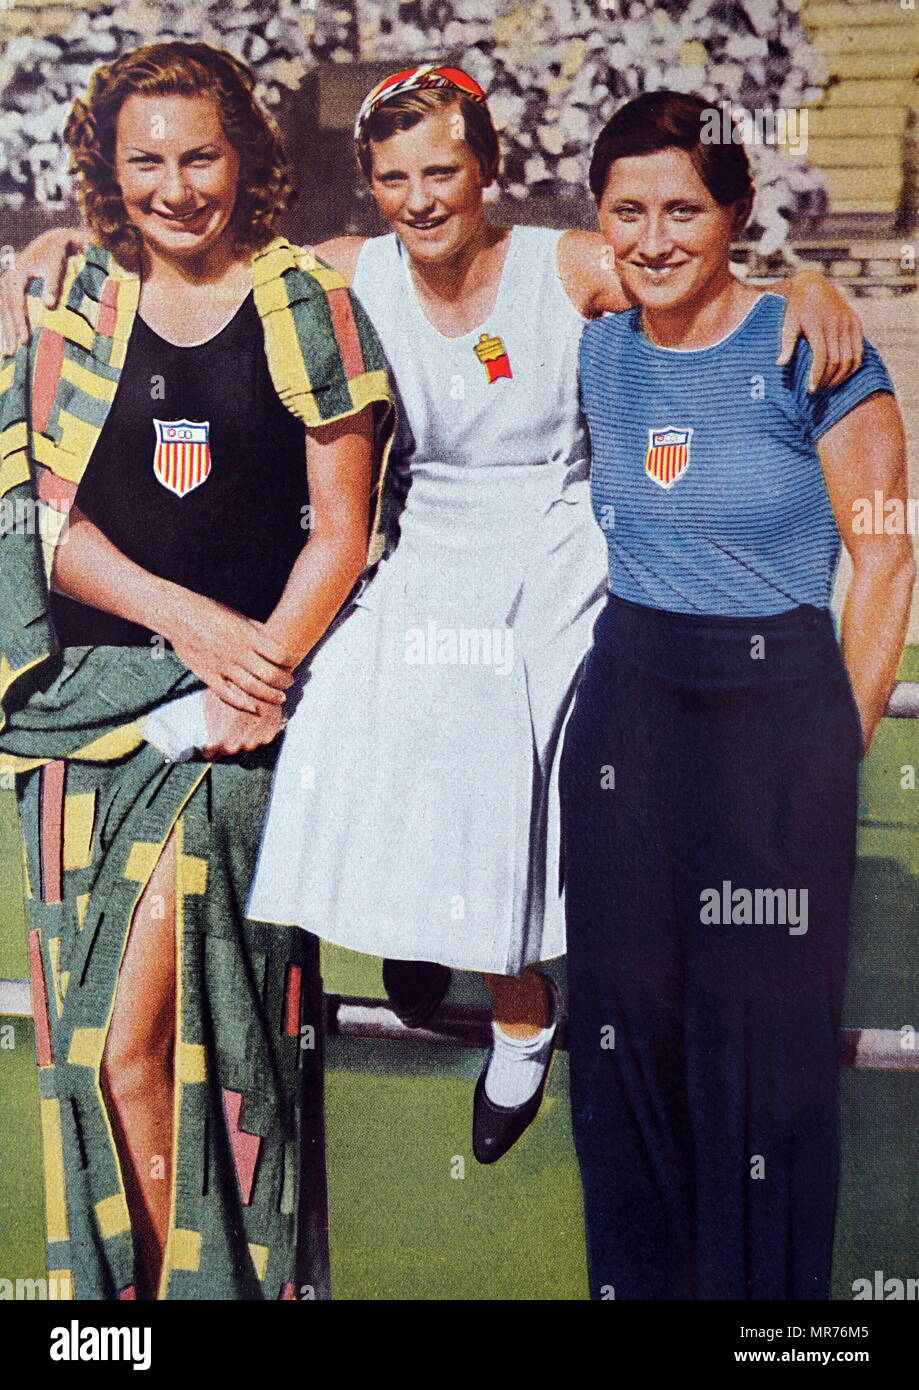 Photograph (from left to right) of Helene Emma Madison (1913 - 1970) from the USA with Willemijntje den Ouden (1918 - 1997) from the Netherlands and Eleanor Saville (1909 - 1998) during the 1932 Olympic games. These women competed in the 100 meter freestyle, Helene took gold, Willy took silver and Eleanor bronze. Stock Photo